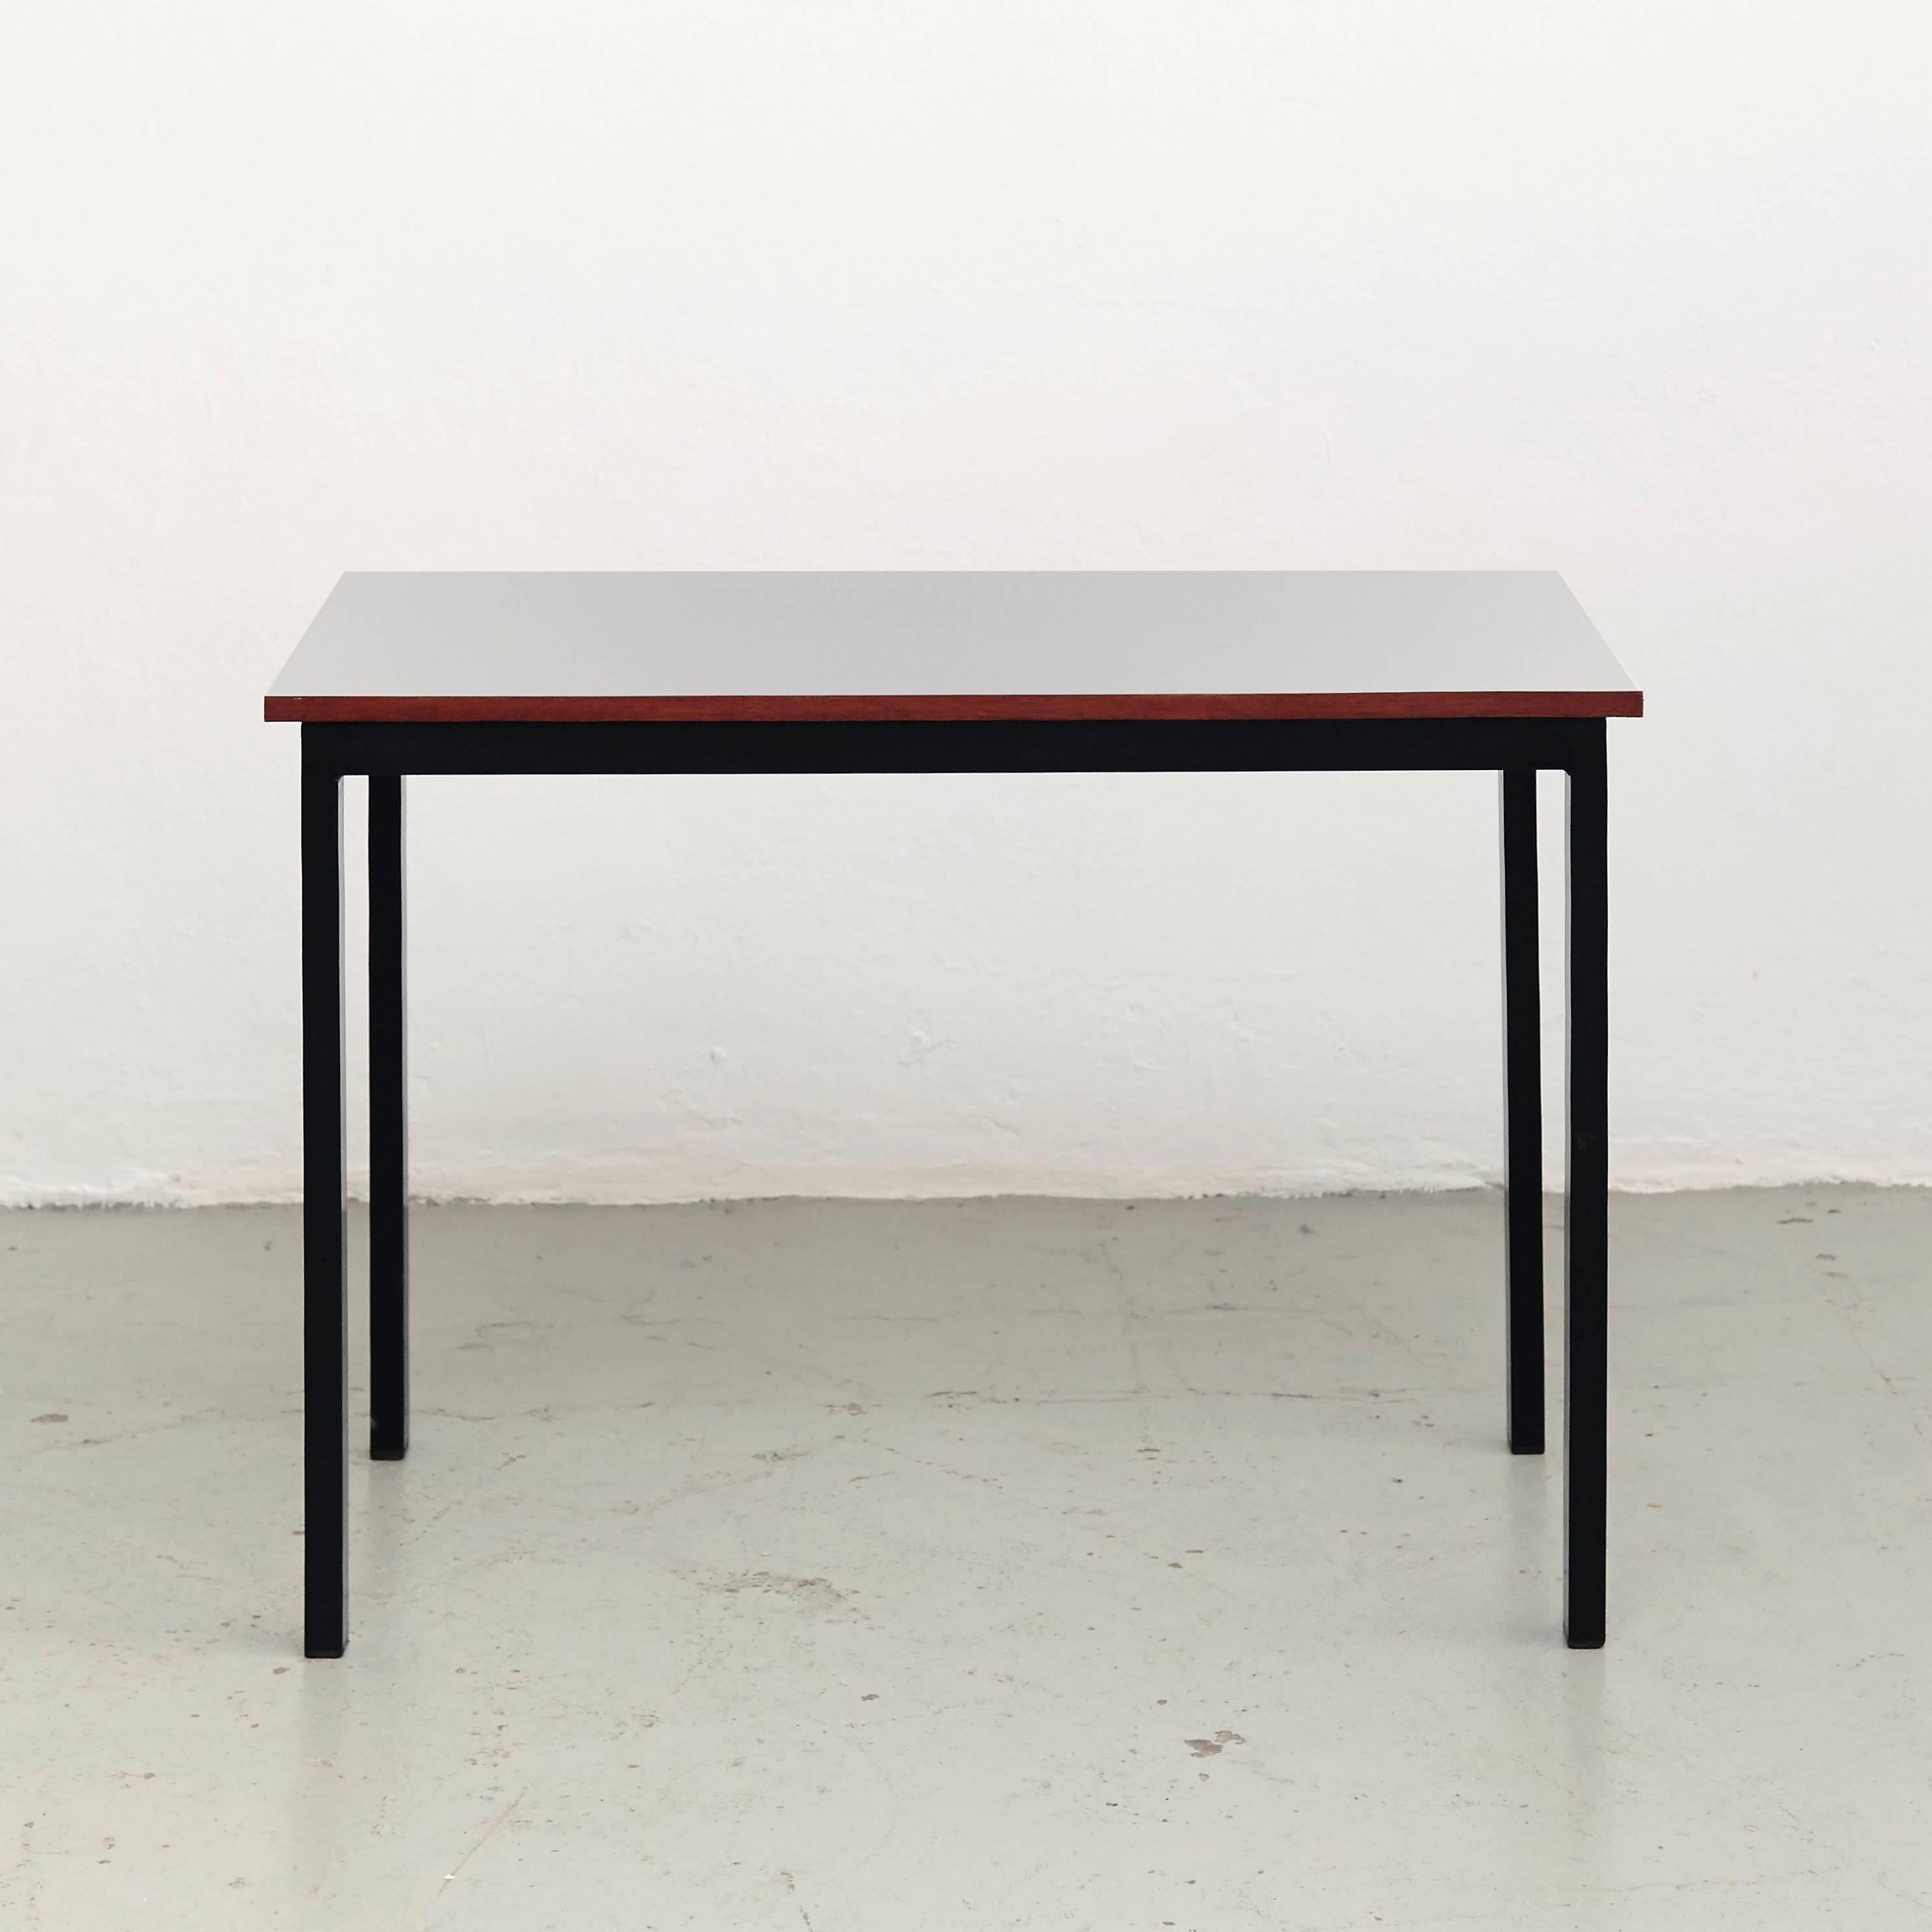 Console designed by Charlotte Perriand, circa 1958.
Manufactured in France, circa 1958.
Laminated plastic-covered plywood, painted steel. 
Grey.

In good original condition, with minor wear consistent with age and use, preserving a beautiful